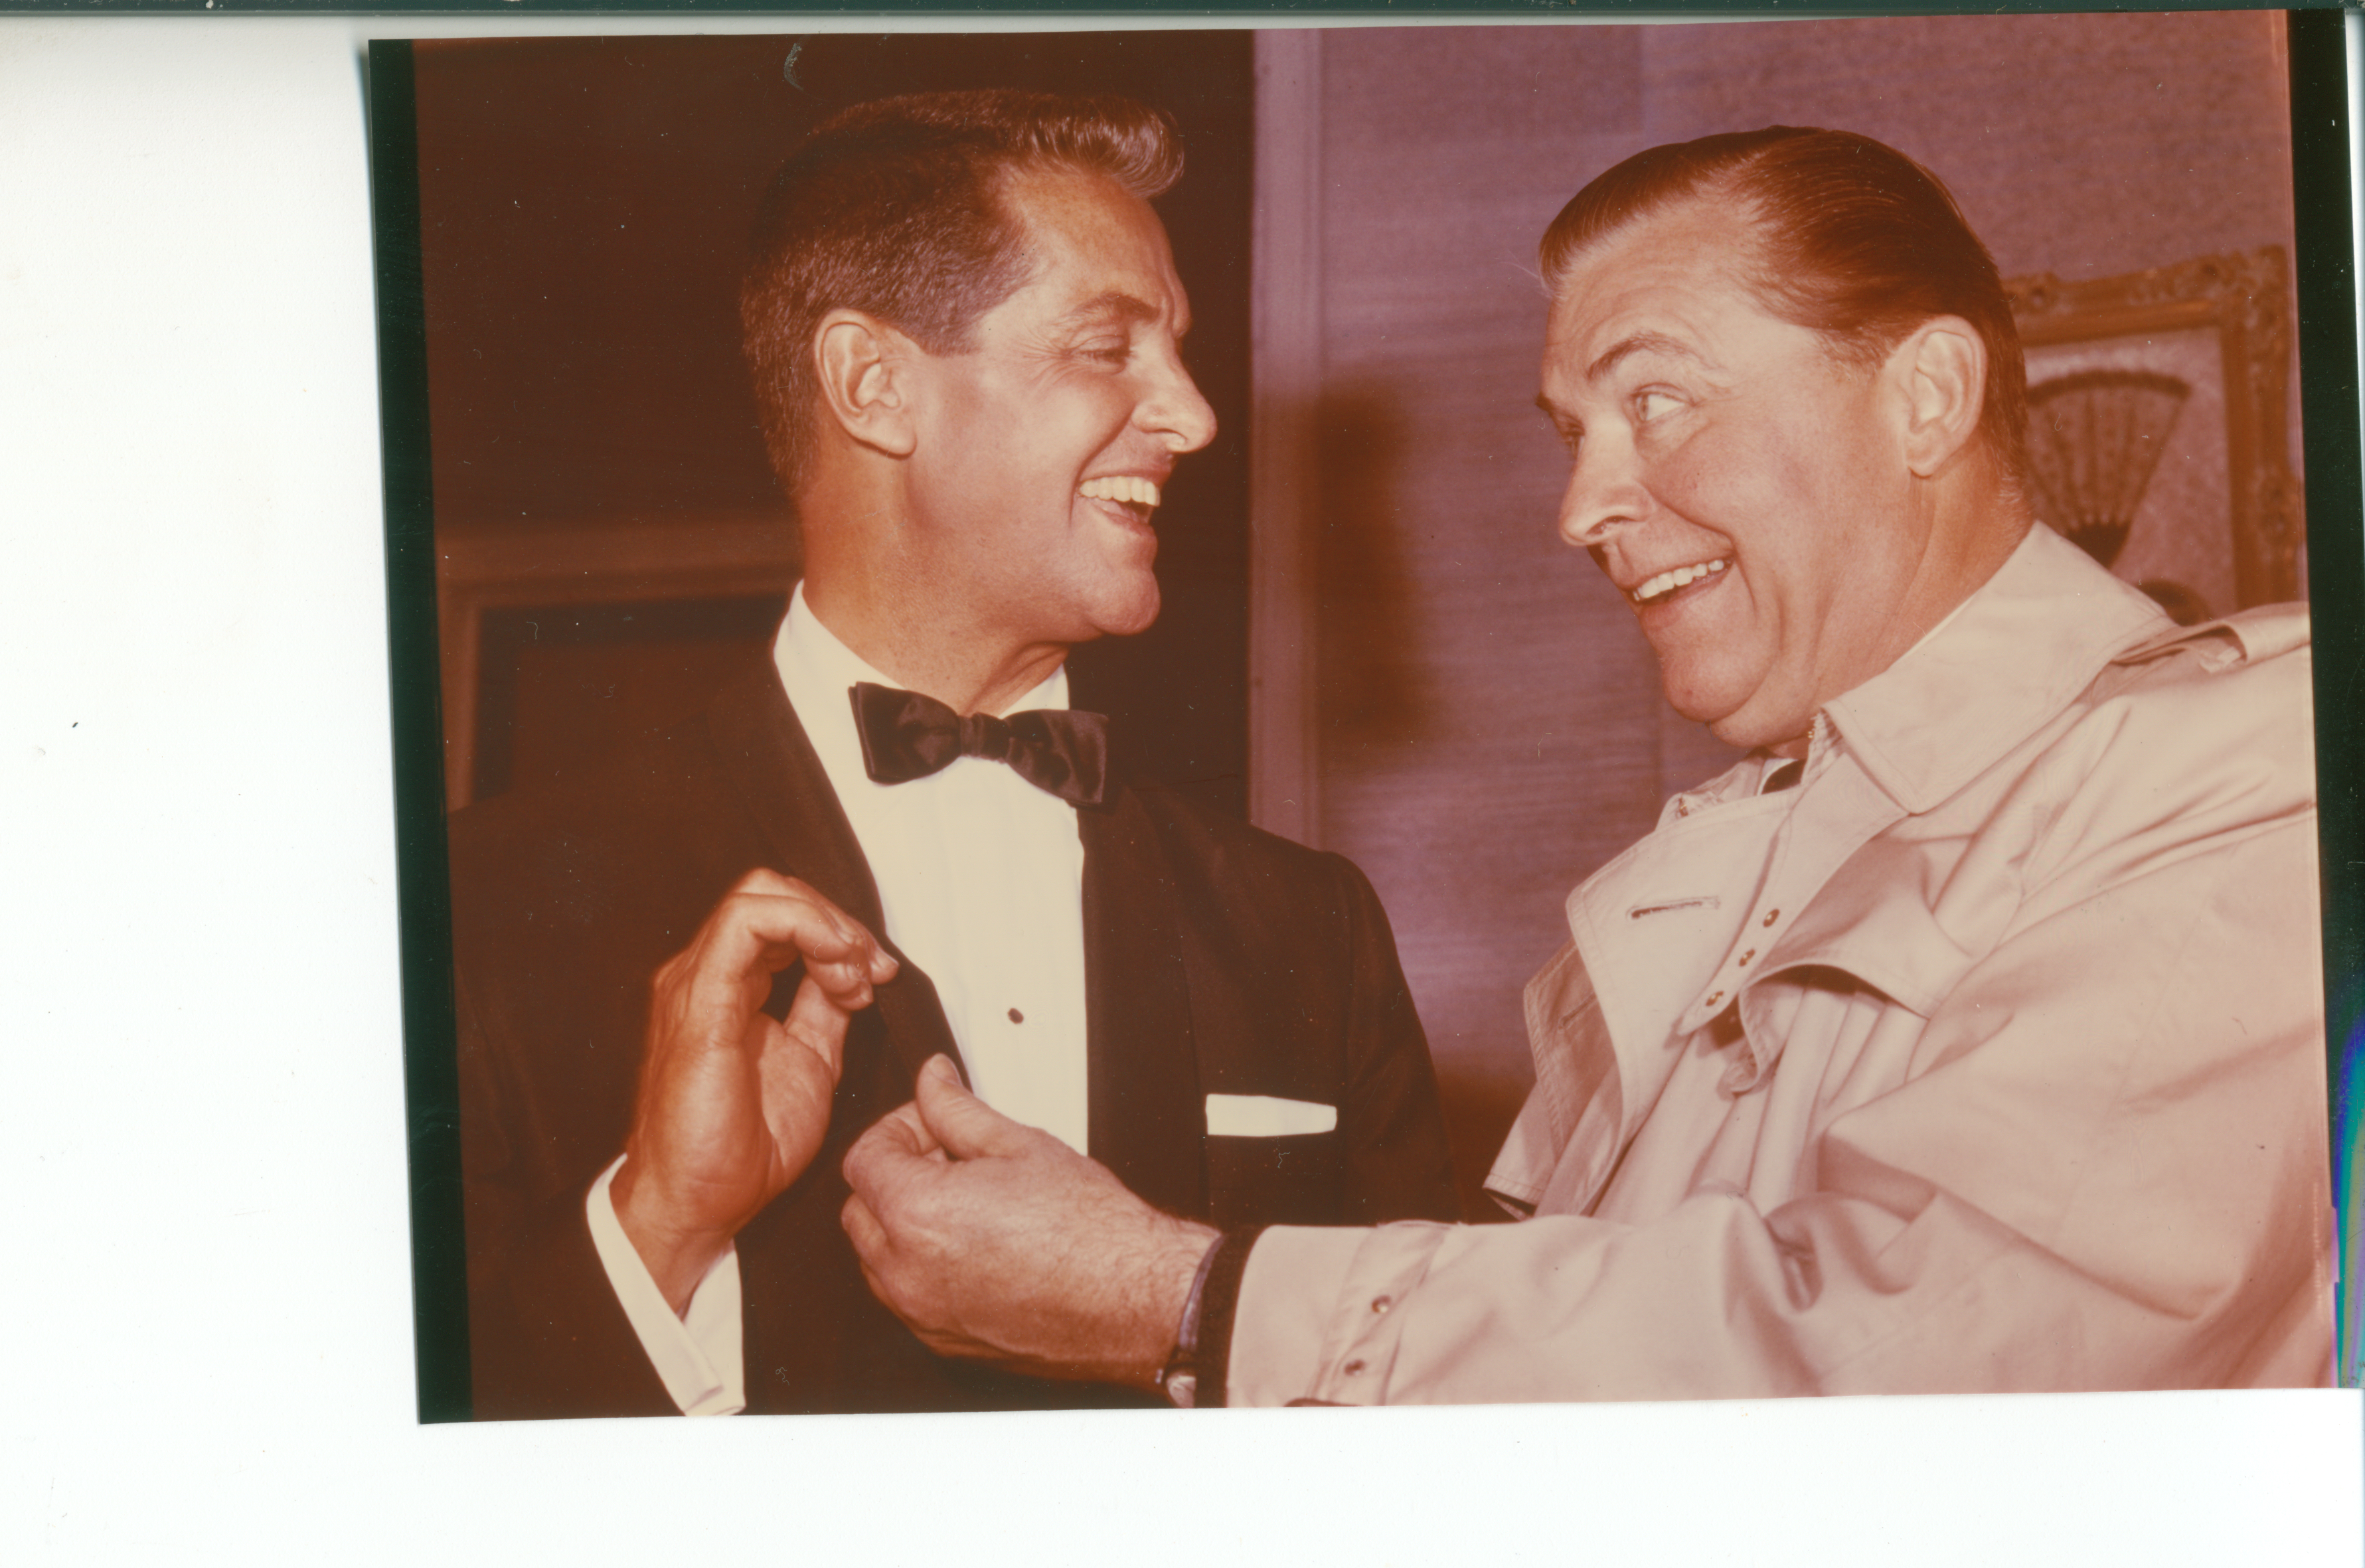 Robert Cummings (left) and Lyle Talbot (right) on 